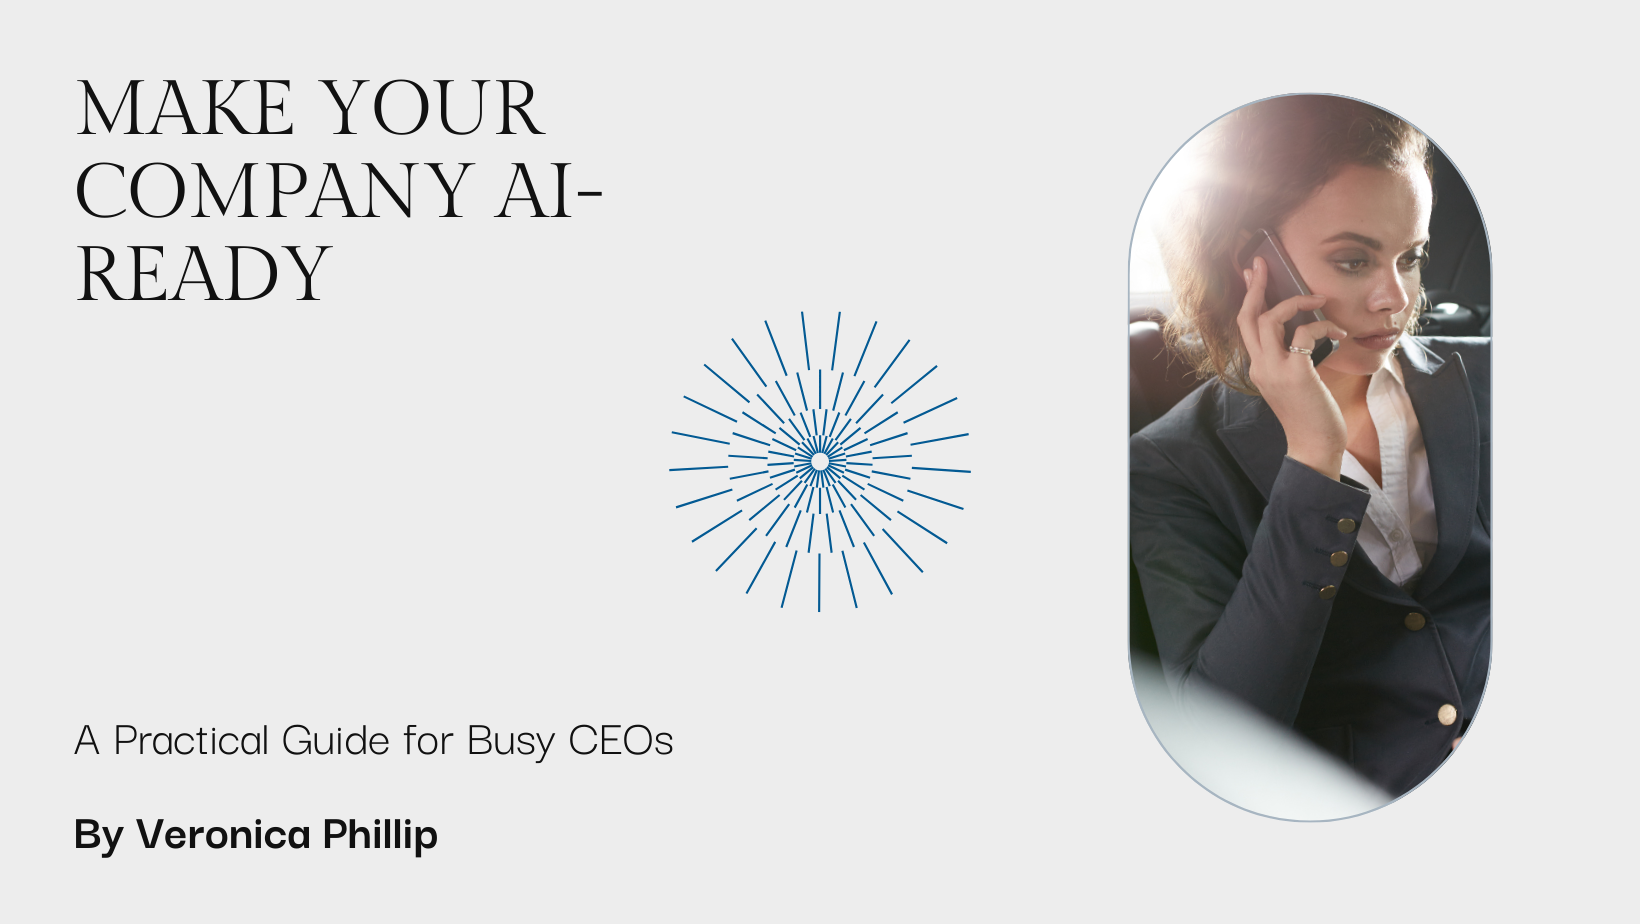 Make Your Company AI-Ready: A Practical Guide for Busy CEOs